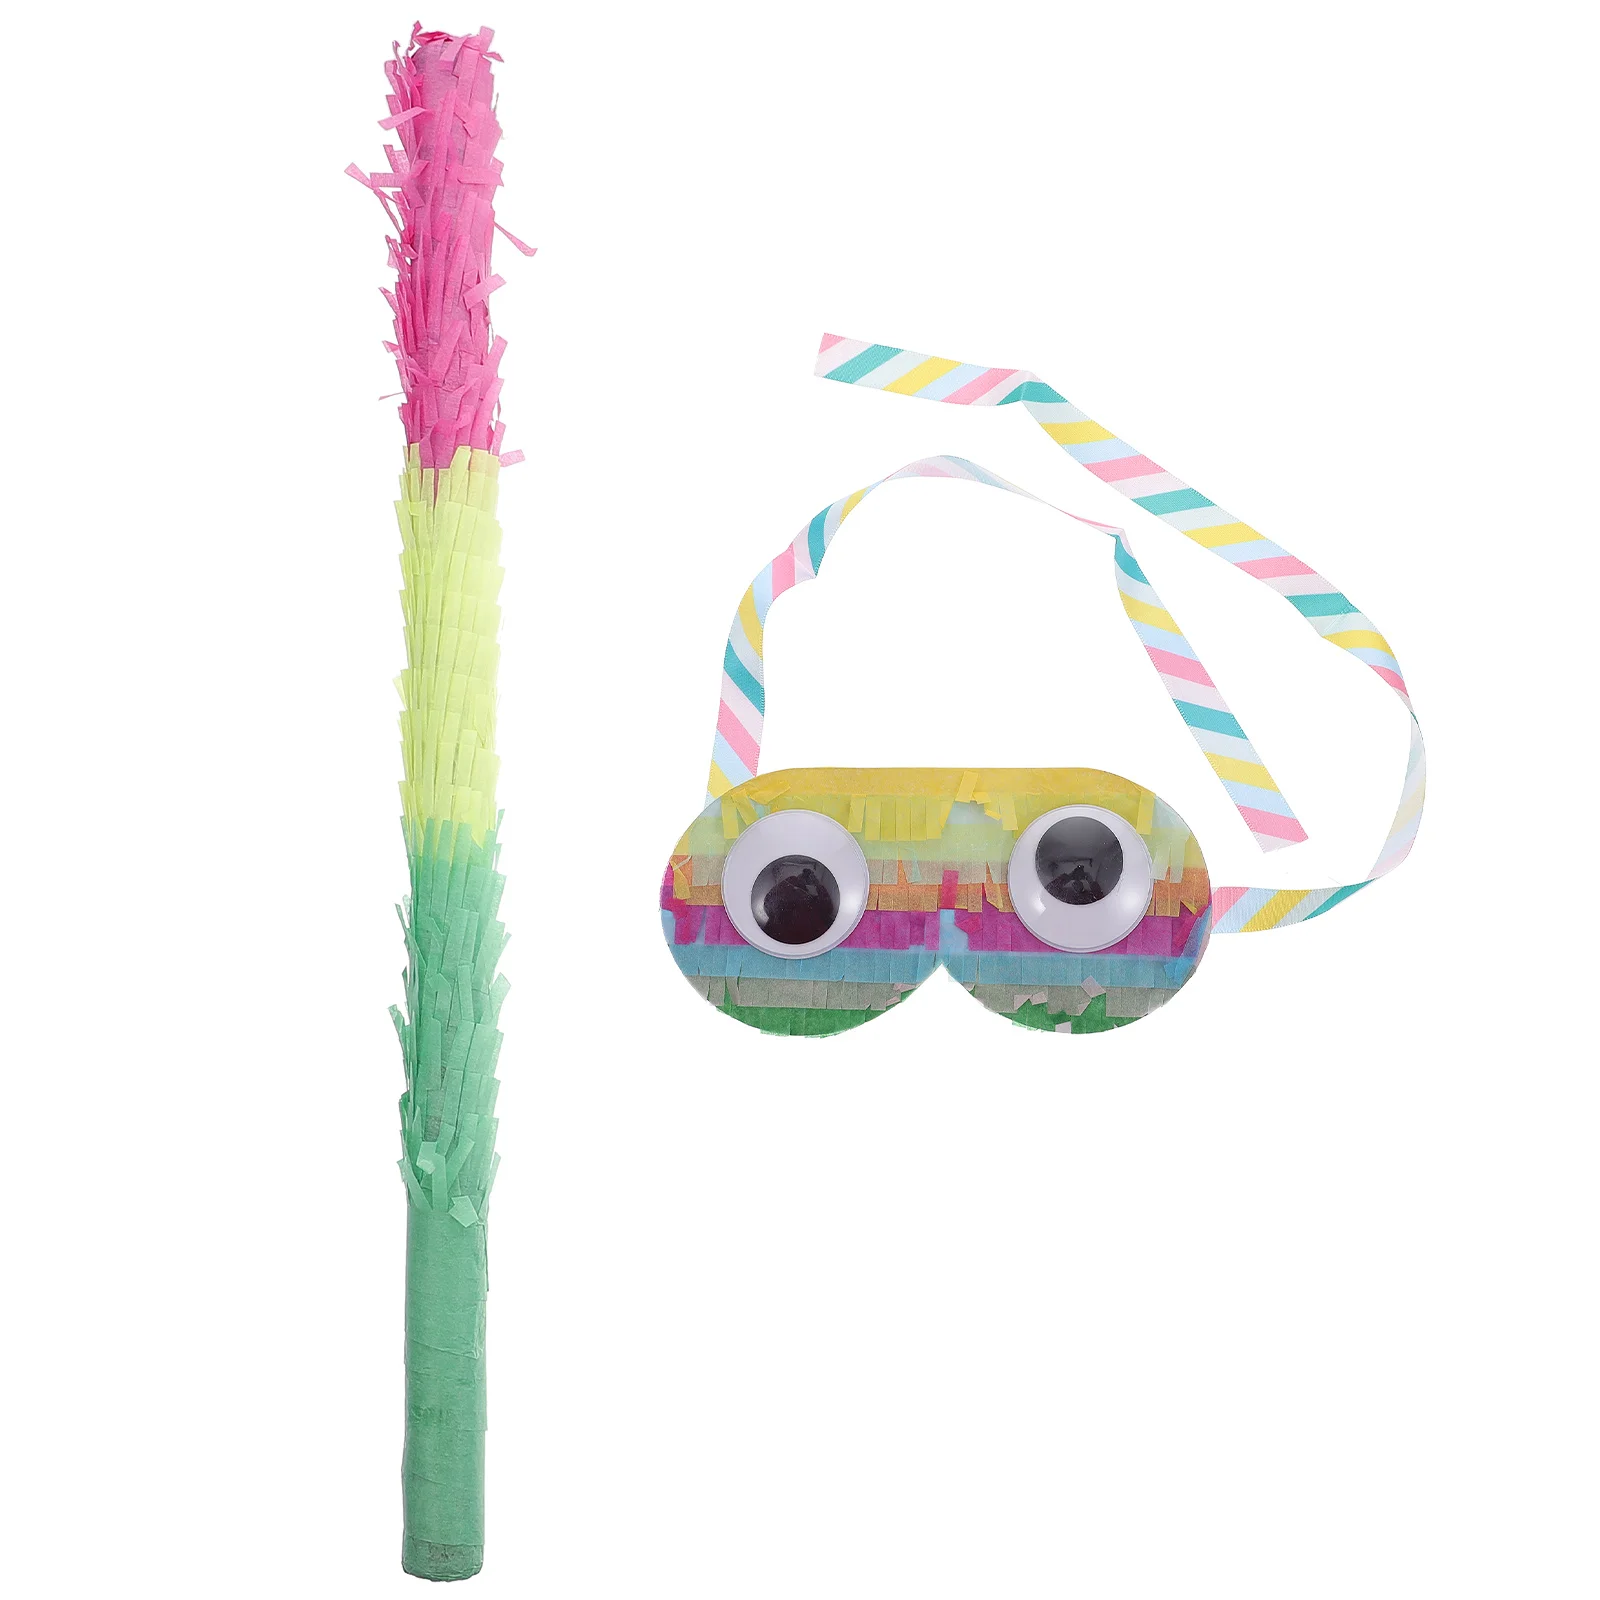 

2 Pcs Pinata Children's Colorful Sticks Birthday Party Halloween Toys Cardboard Candy Kids Paper Multicolored Tools Blindfolds